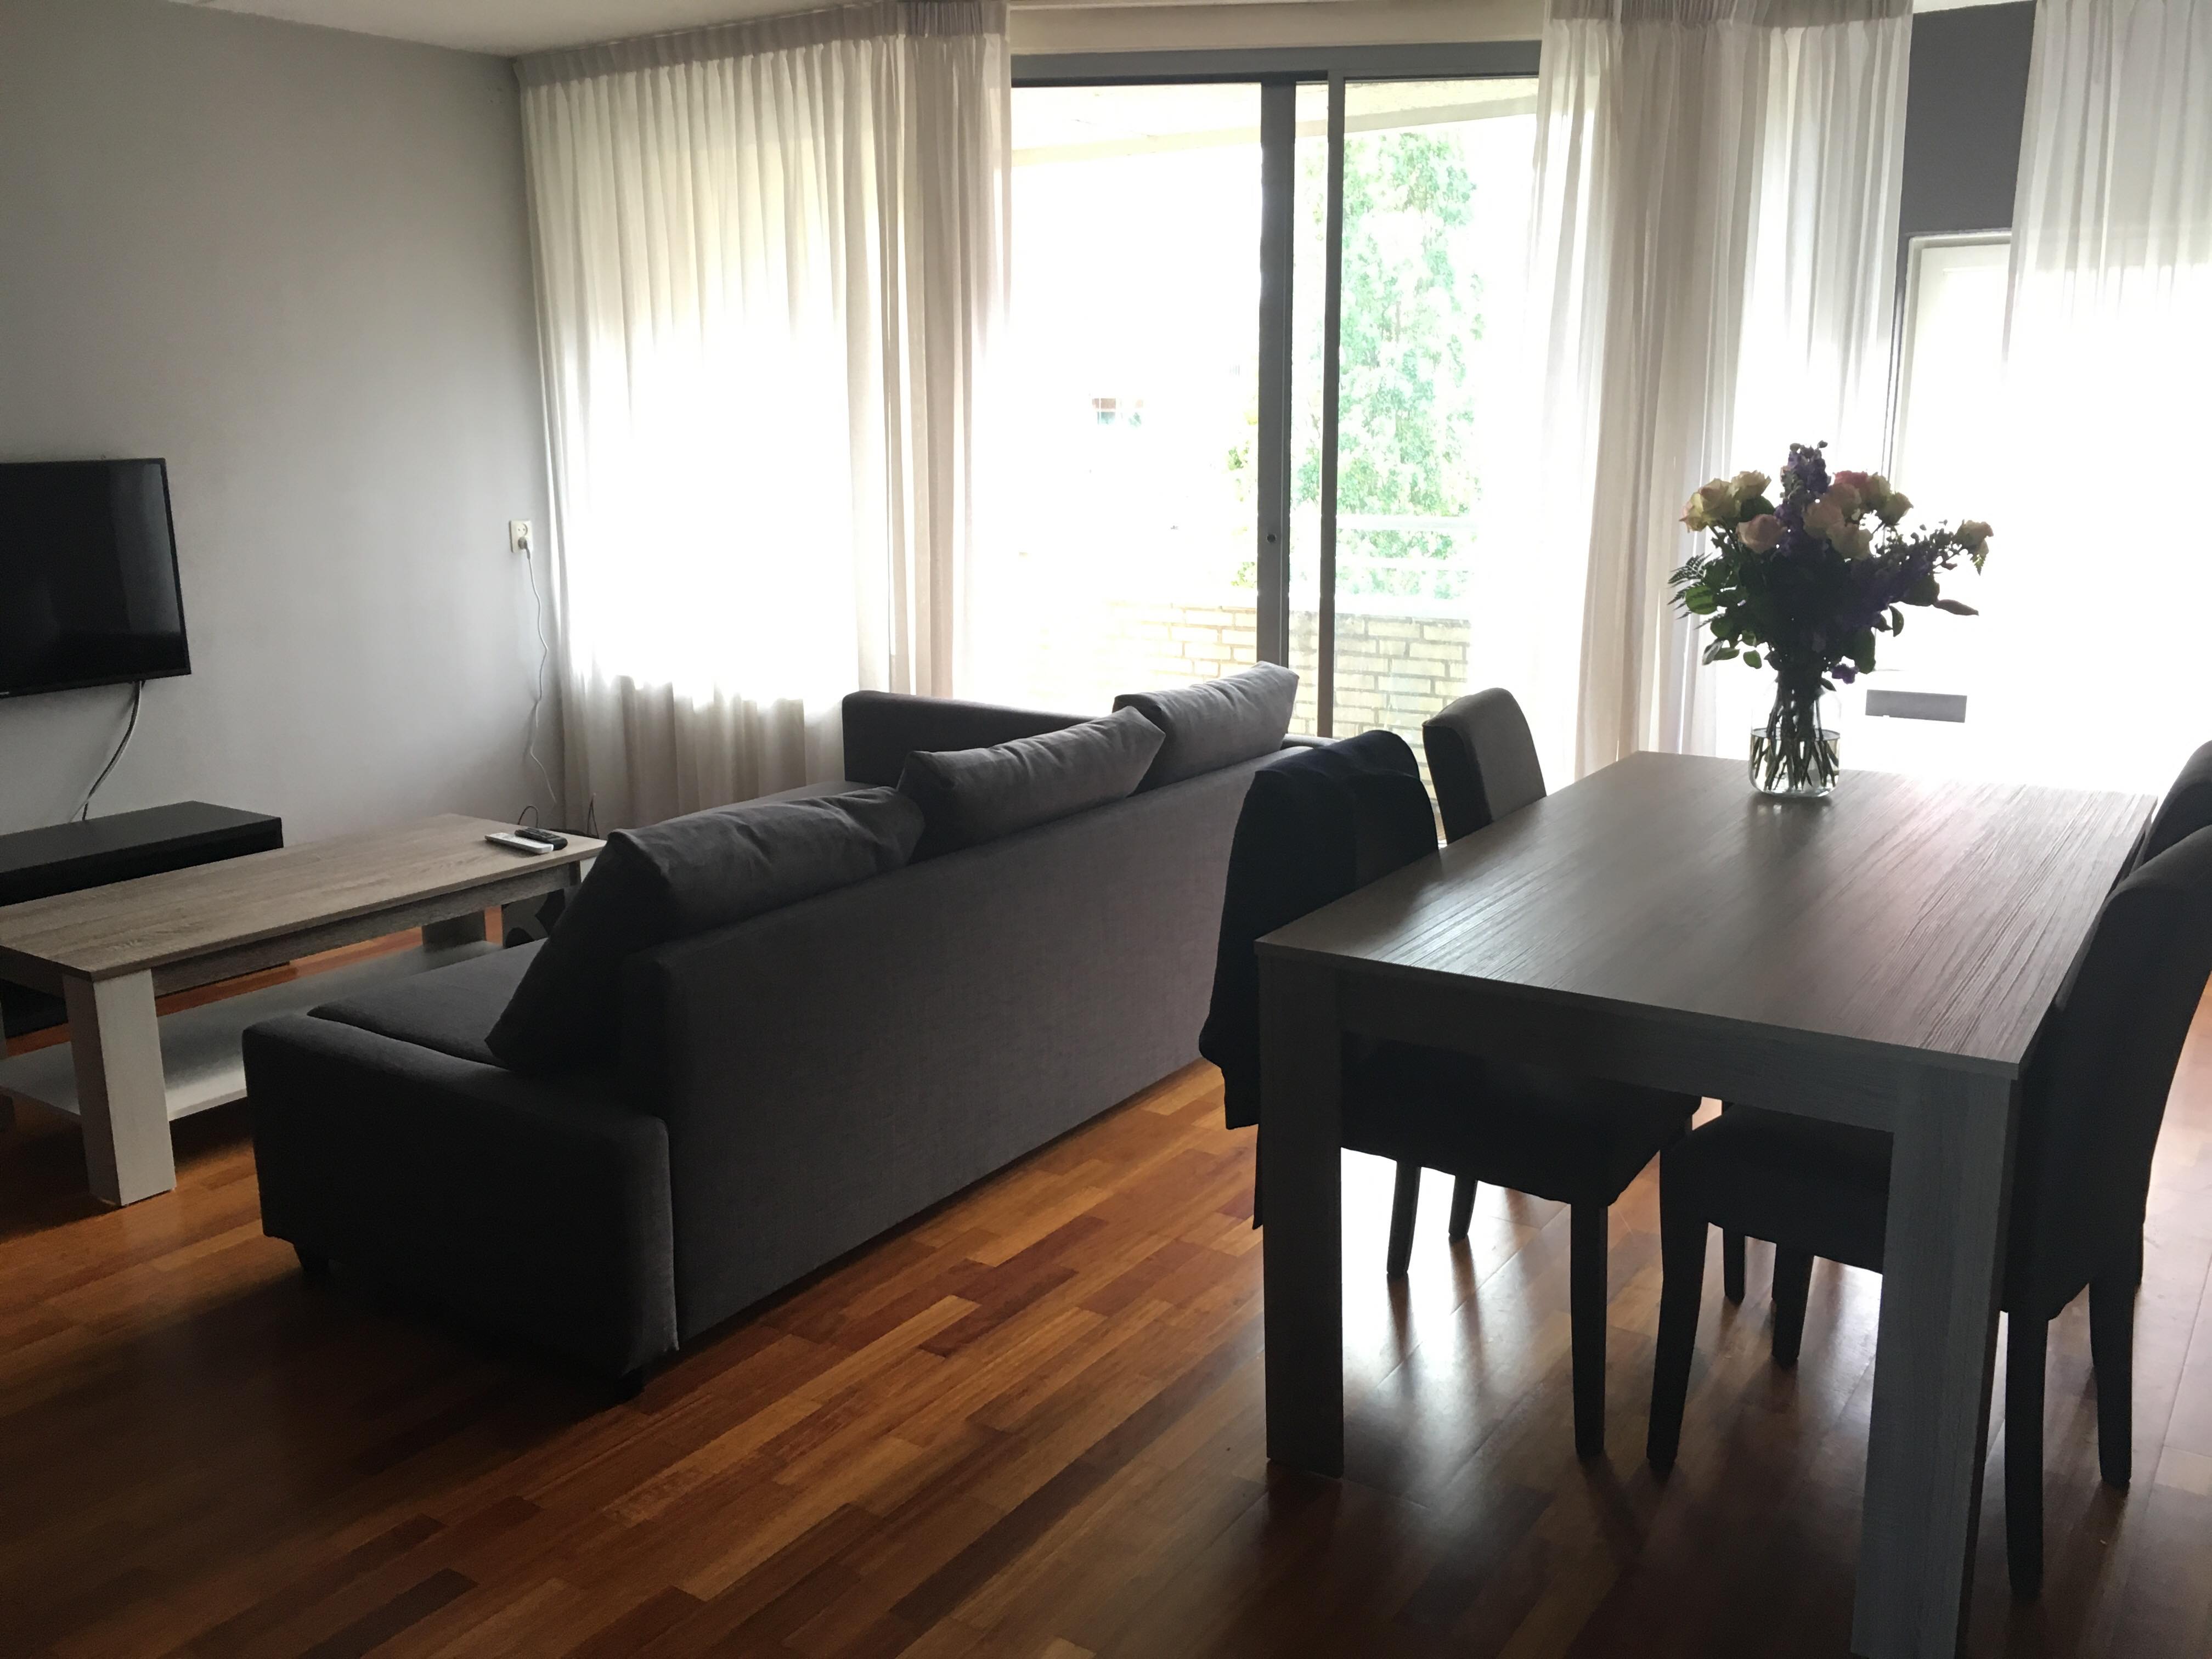 90m2 apartment in Amsterdam west - 3 bedrooms - rent whole apartment/single room